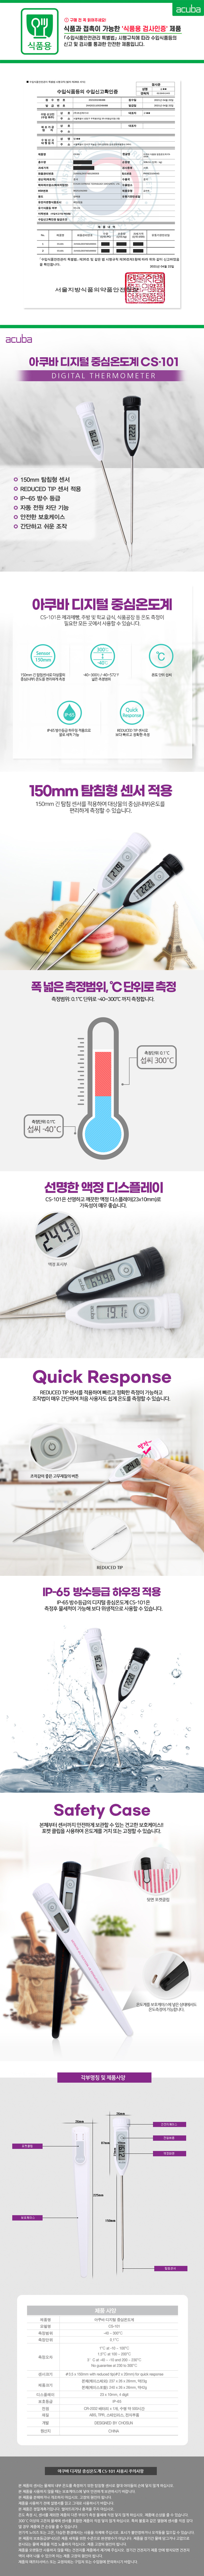 digital_water_proof_thermometer